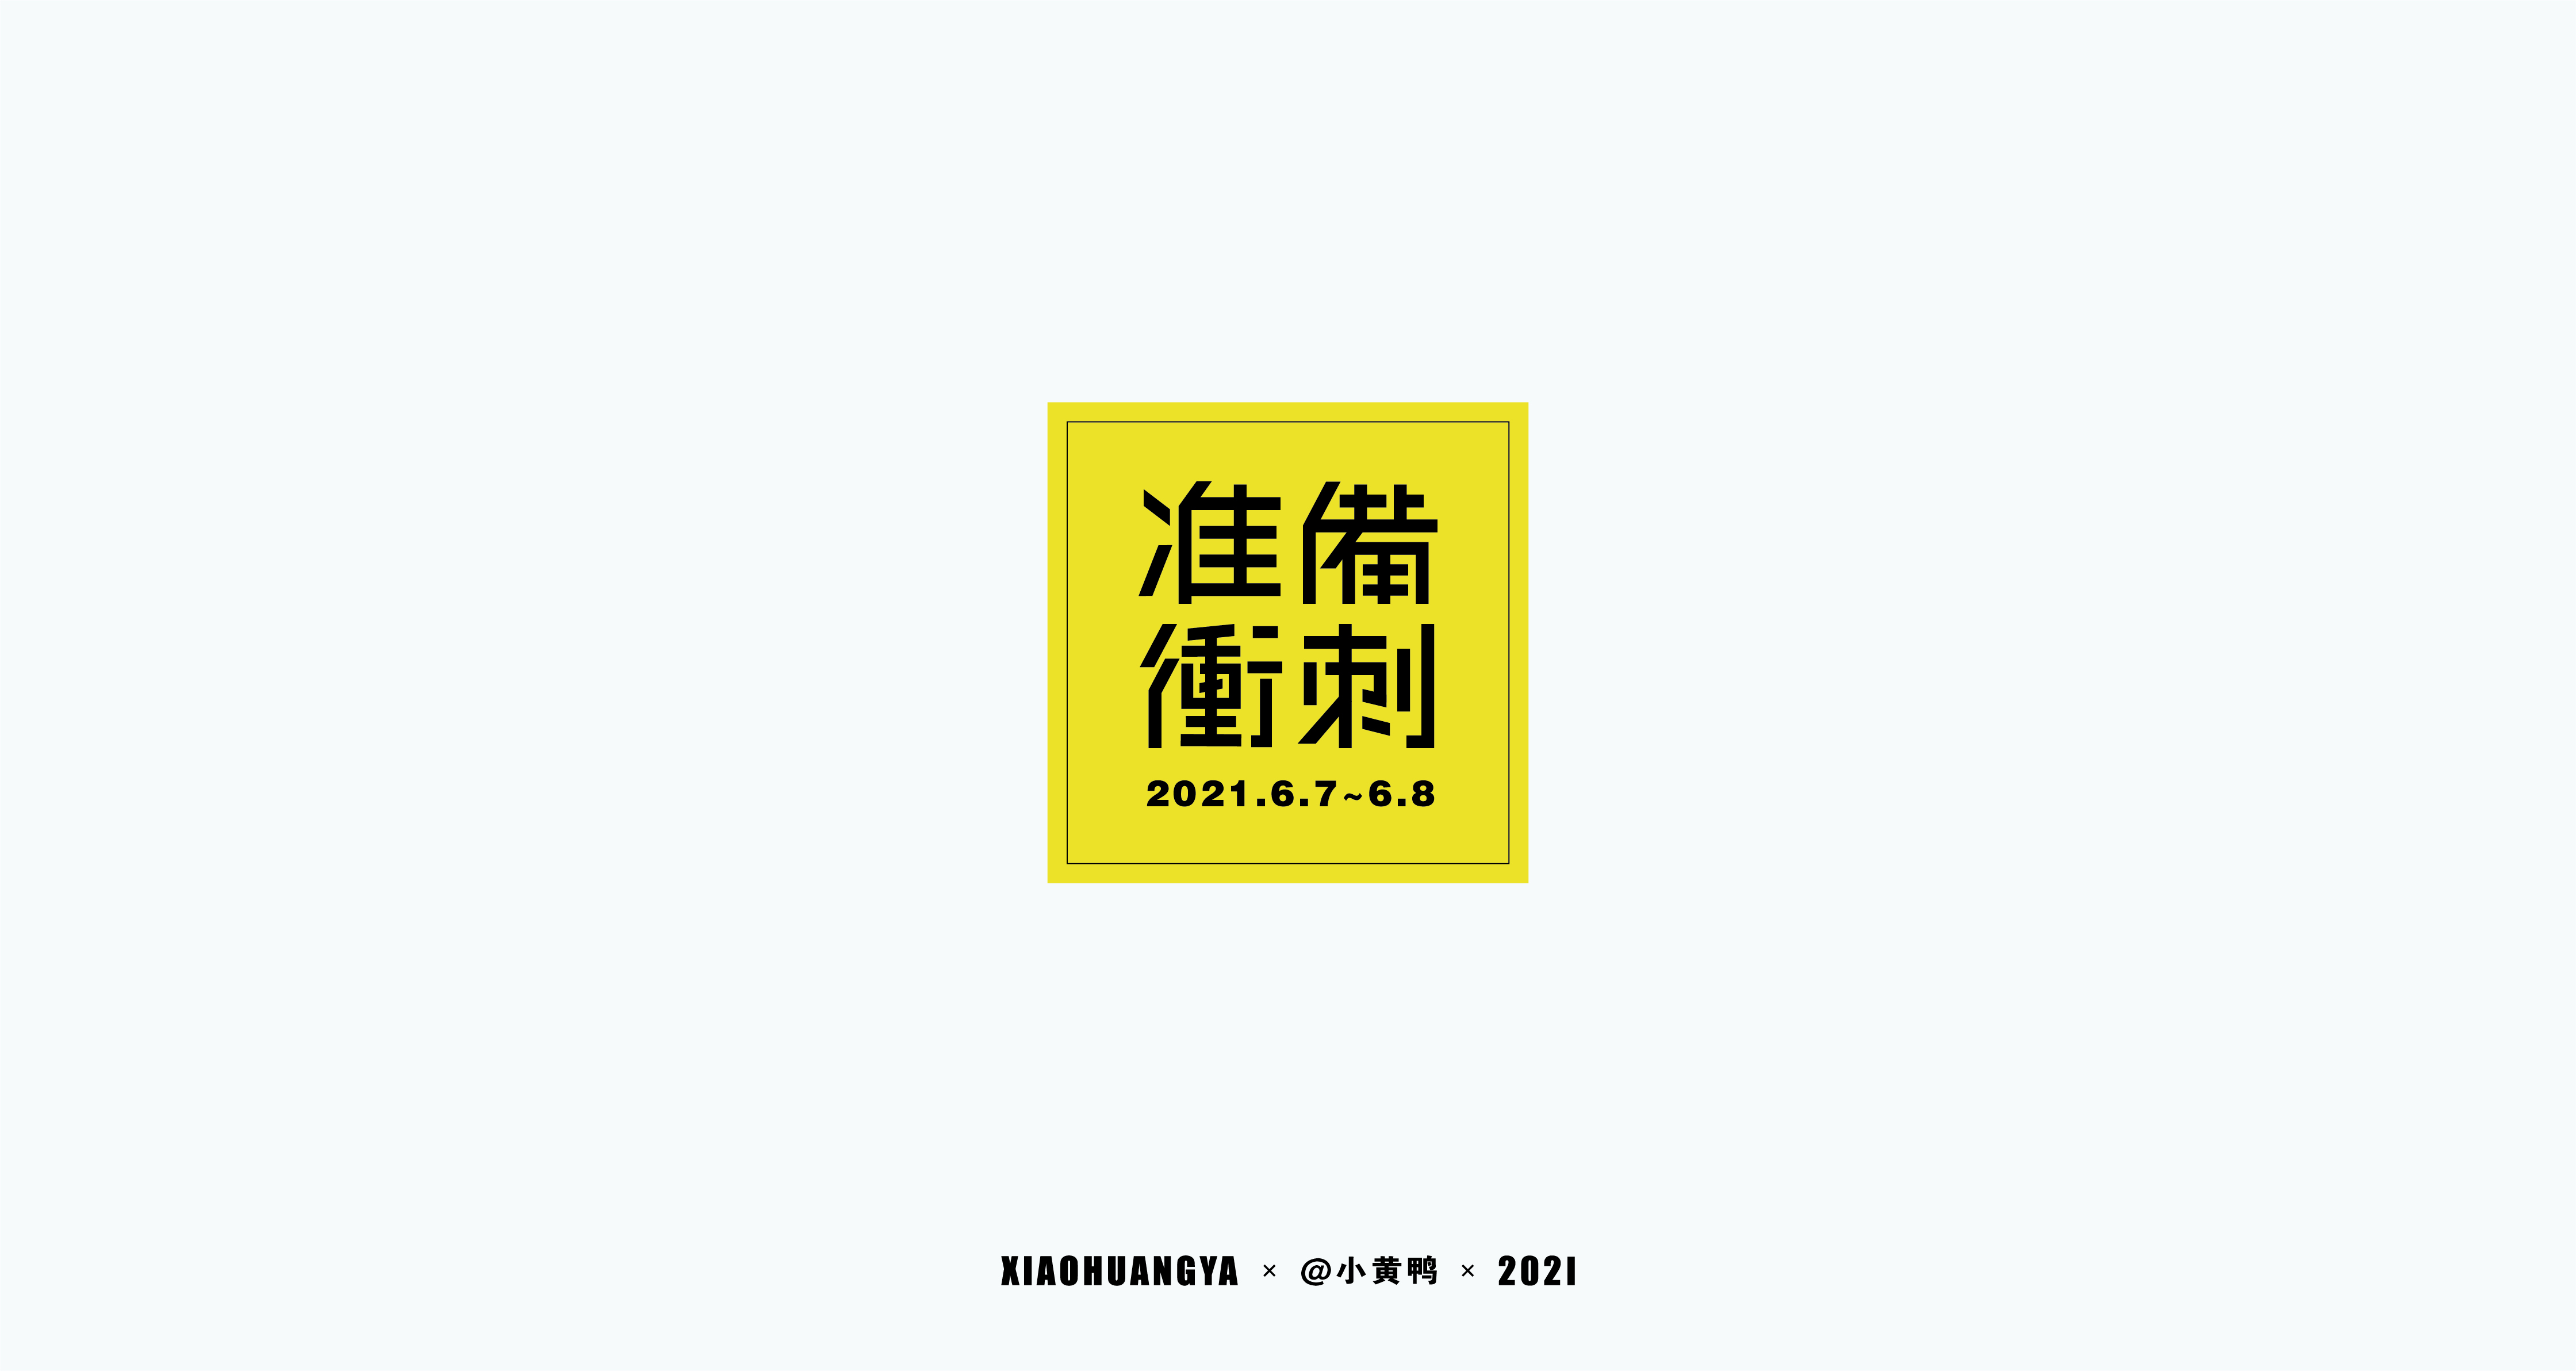 20P Collection of the latest Chinese font design schemes in 2021 #.184